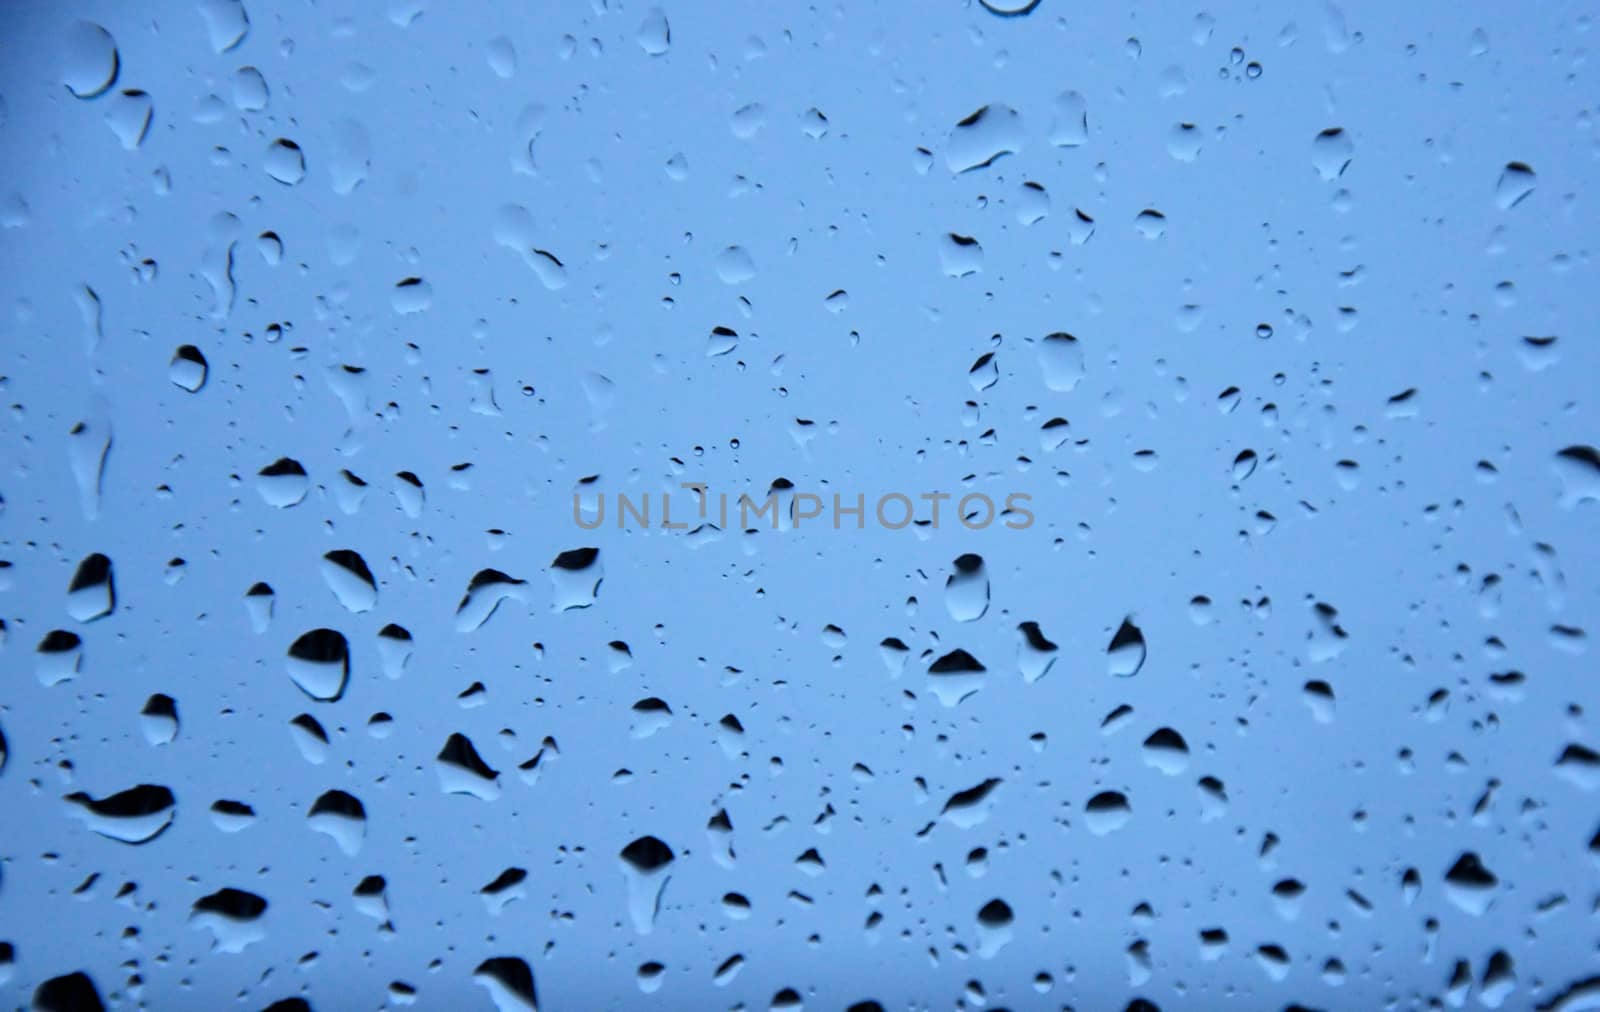 raindrops on window in front of blue backgrond